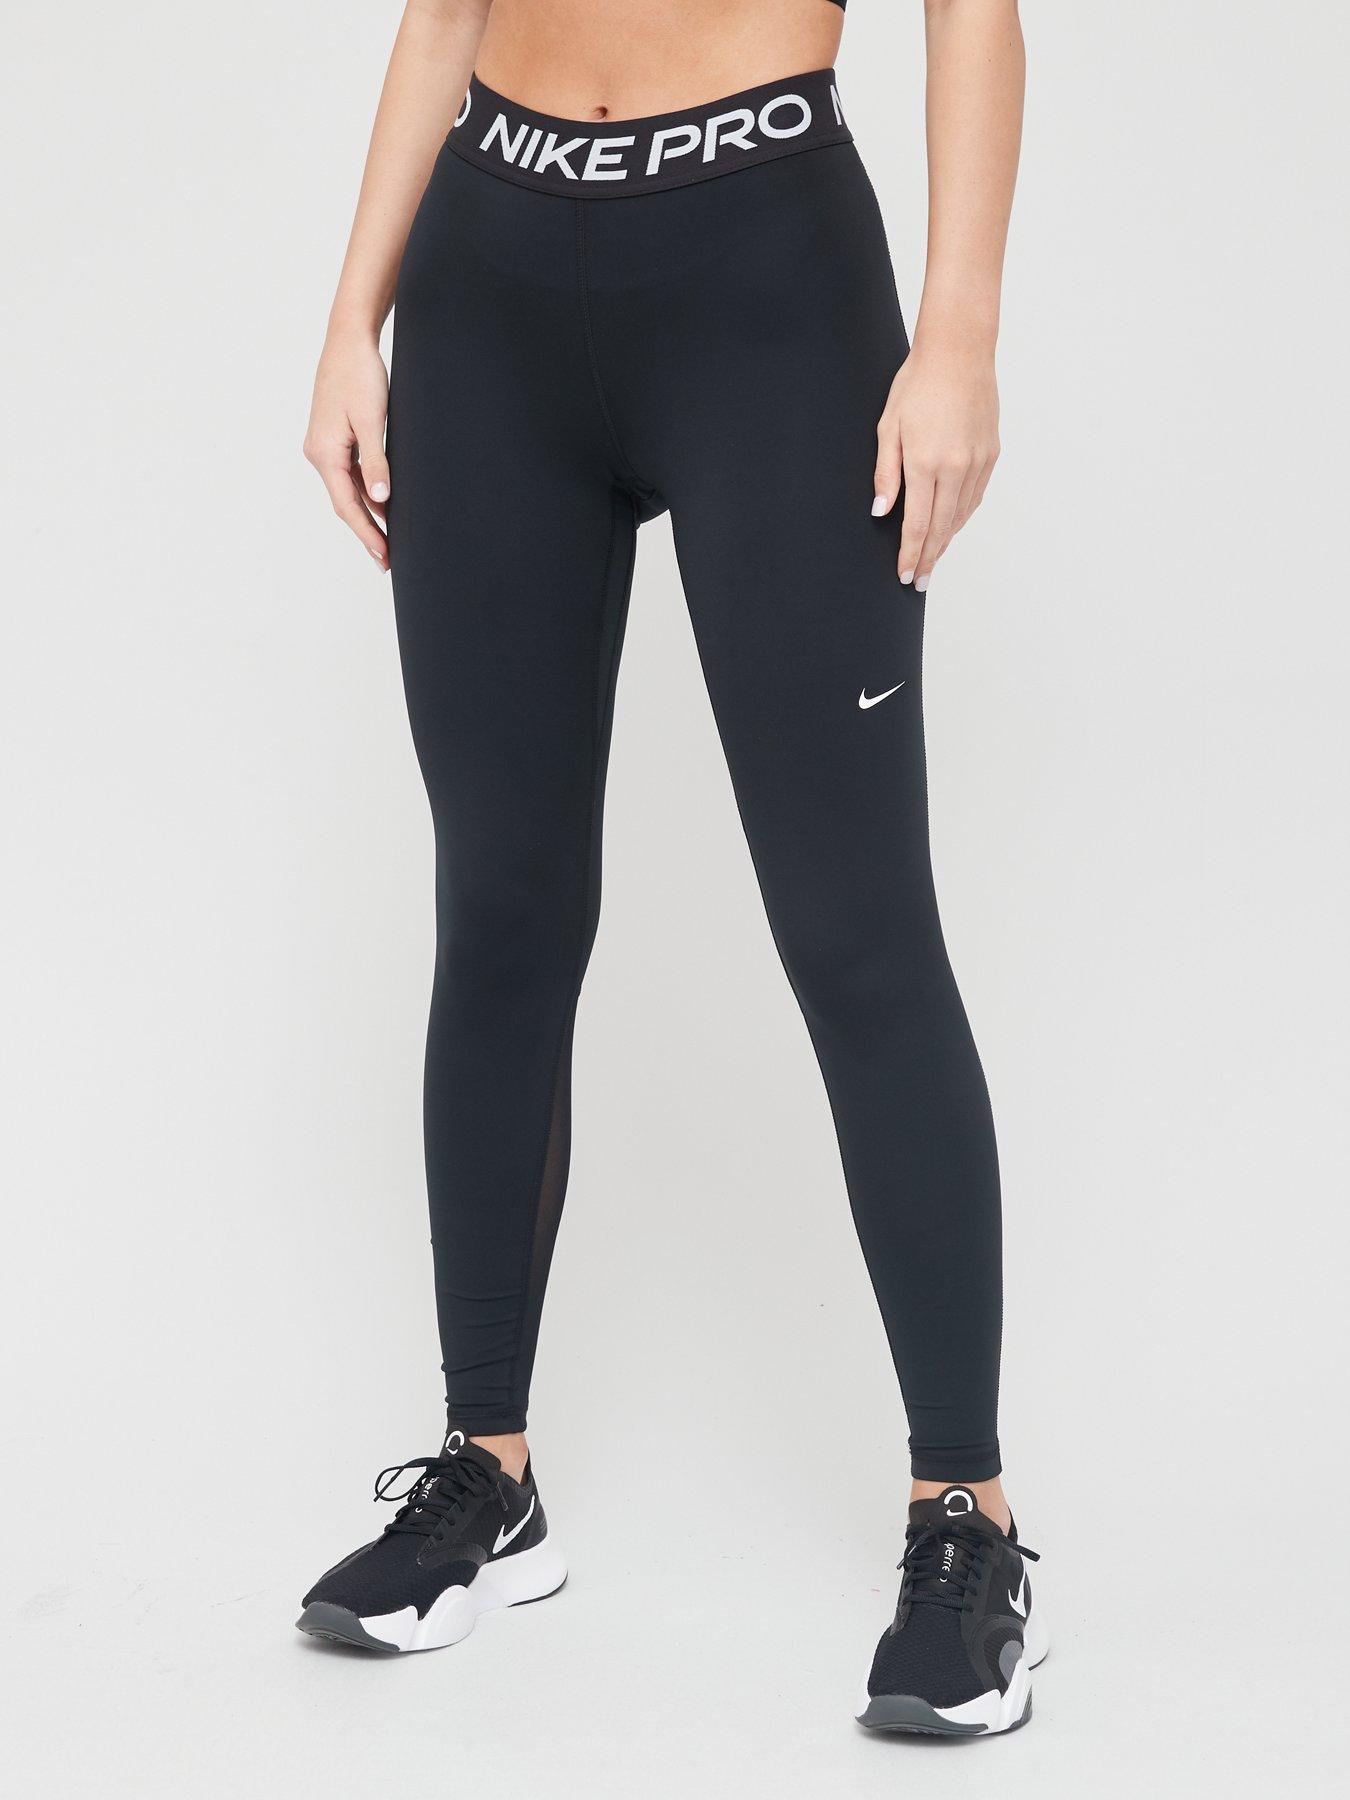 Nike leggings  Womens workout outfits, Sports wear fashion, Running tights  outfit